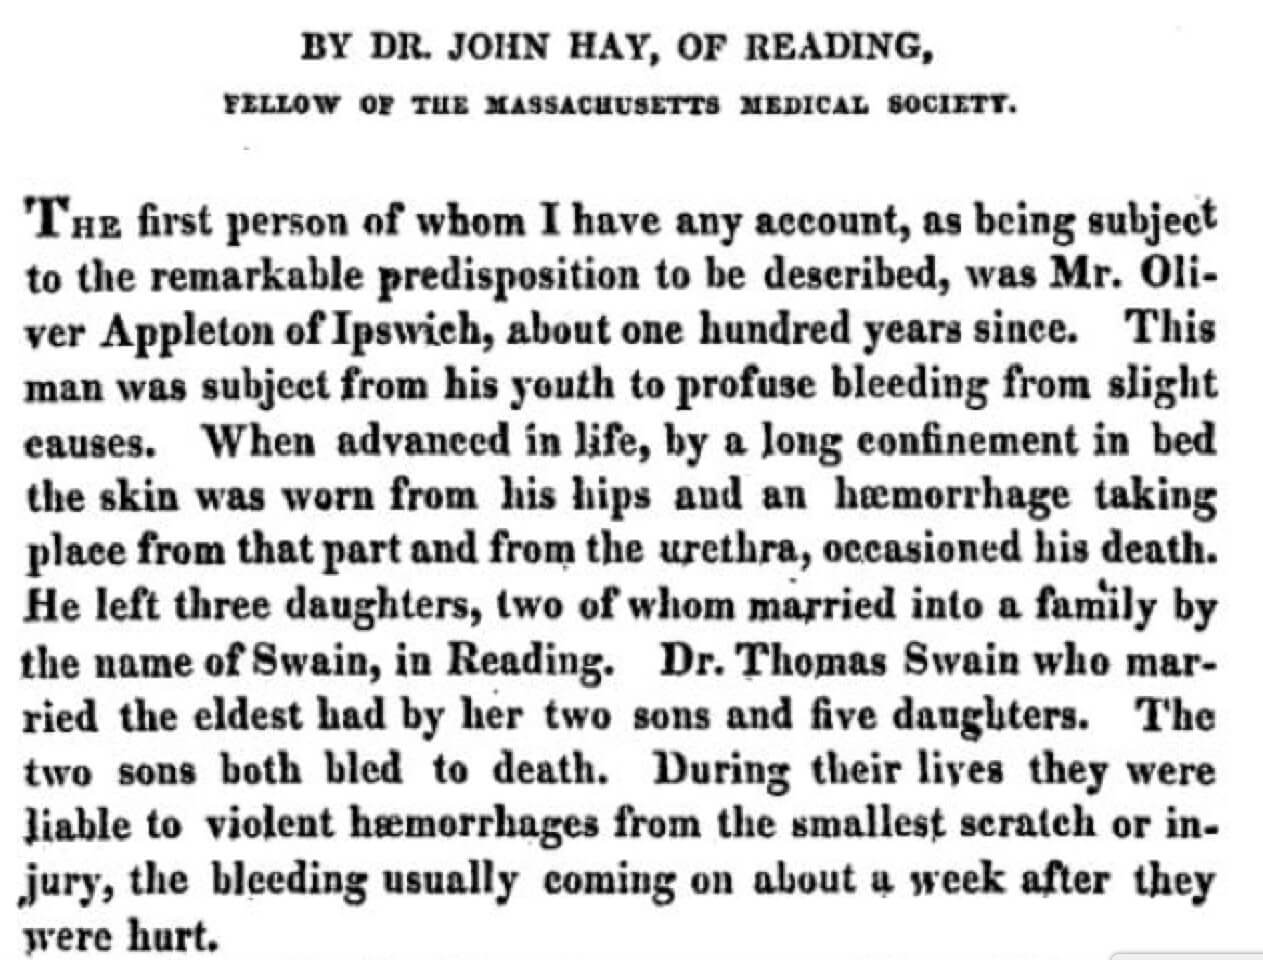 Excerpt reads, "By Dr. John Hay, of Reading, Fellow of the Massachusetts Medical Society. / The first person of whom I have any account, as being subject to the remarkable predisposition to be described, was Mr. Oliver Appleton of Ipswieh, about one hundred years since. This man was subject from his youth to profuse bleeding from slight causes. When advanced in life, by a long confinement in bed the skin was worn from his hips and an hæmorrhage taking place from that part and from the urethra, occasioned his death. He left three daughters, two of whom married into a family by the name of Swain, in Reading. Dr. Thomas Swain who married the eldest had by her two sons and five daughters. The two sons both bled to death. During their lives they were liable to violent hæmorrhages from the smallest scratch or injury, the bleeding usually coming on about a week after they were hurt."